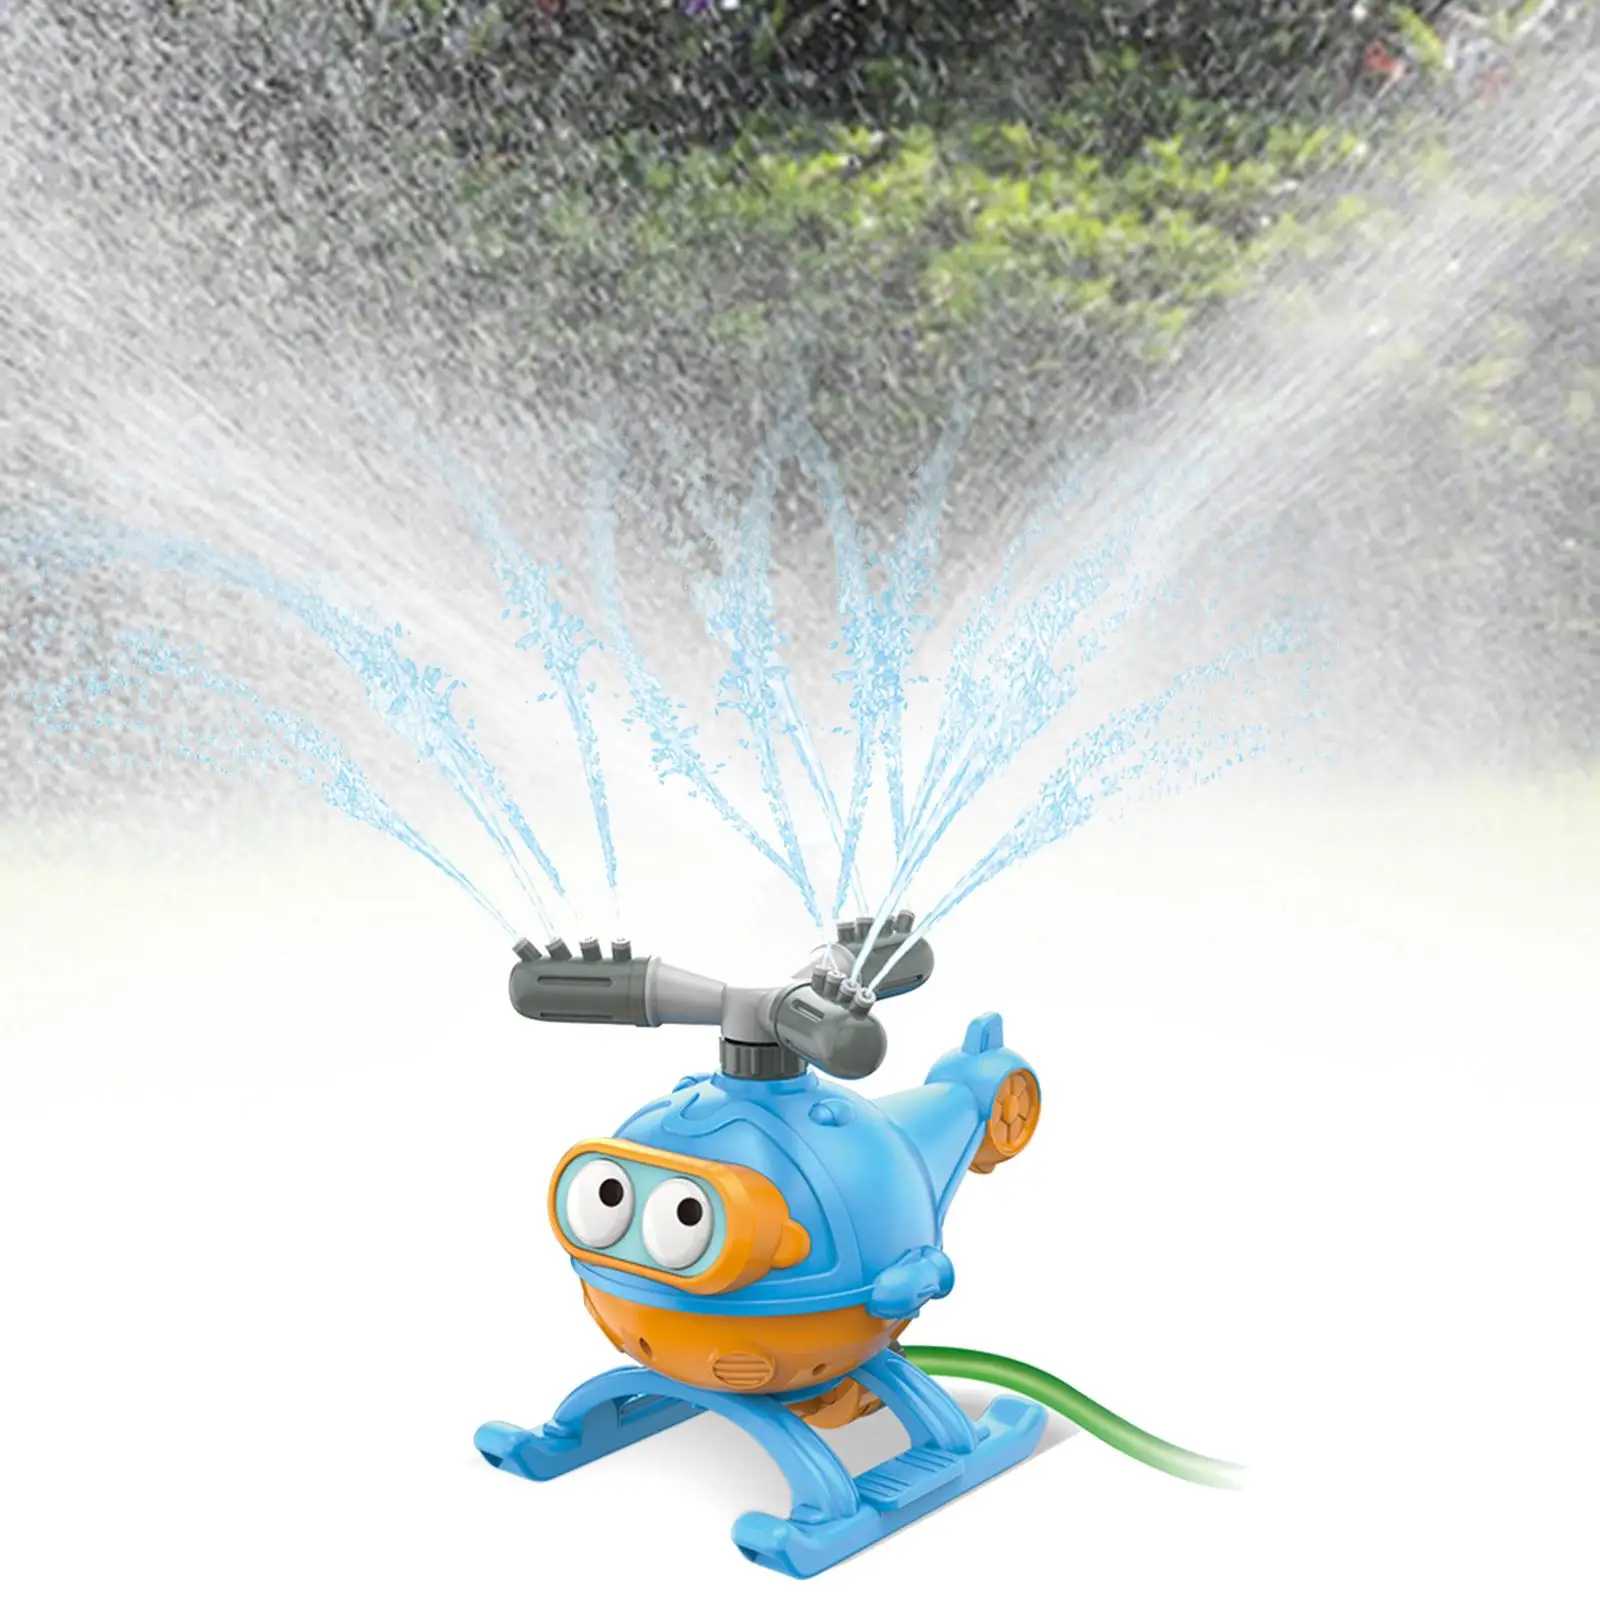 Helicopter Water Toys Water Pressure Control for Birthday Gift Yard Holiday